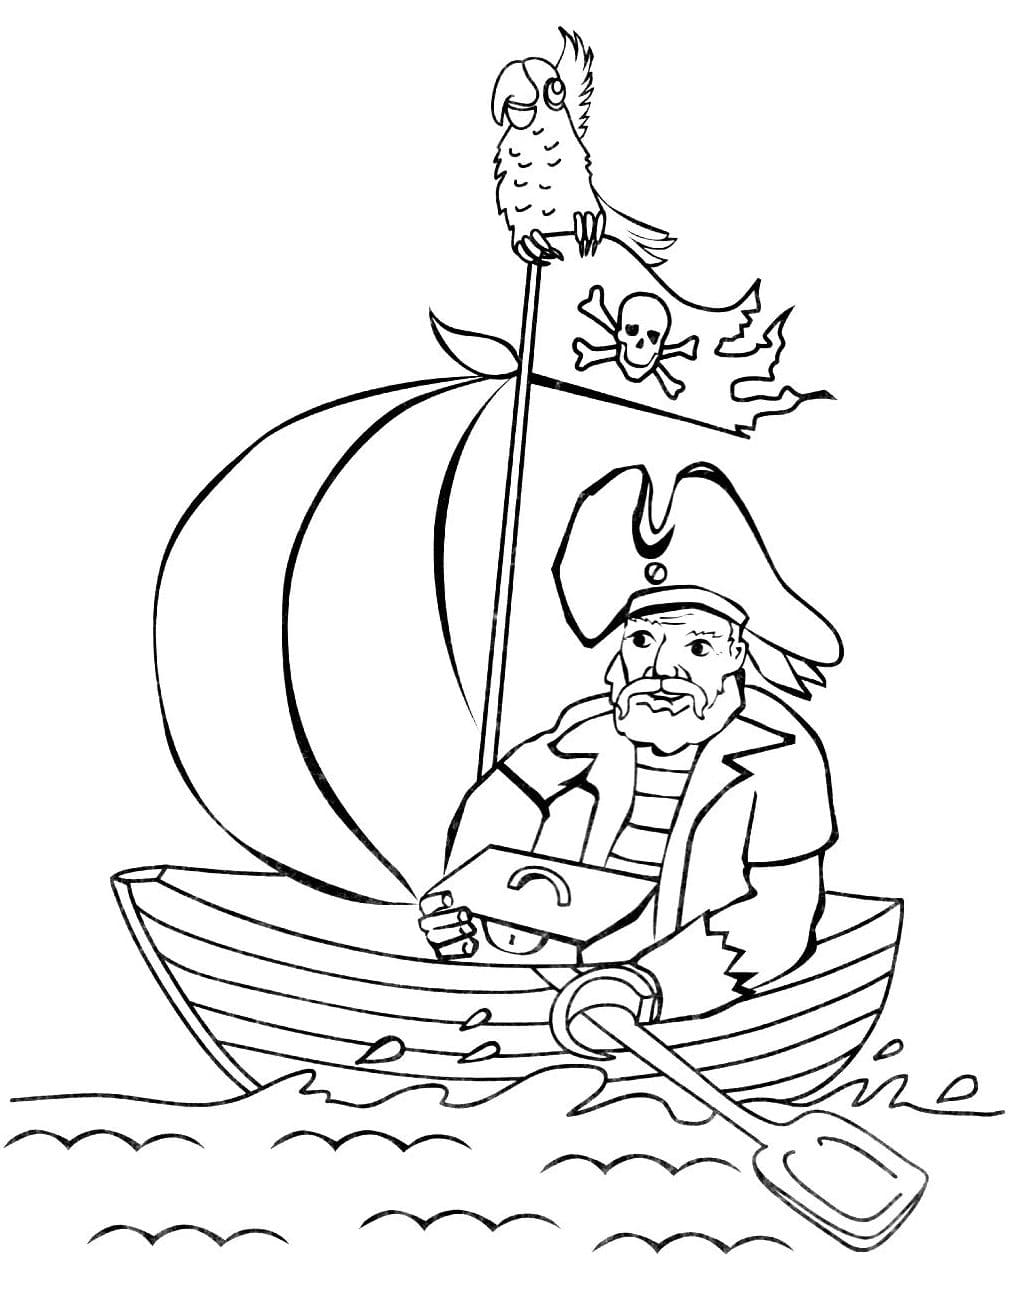 Coloring Pages Pirates A pirate and a parrot on a boat Print